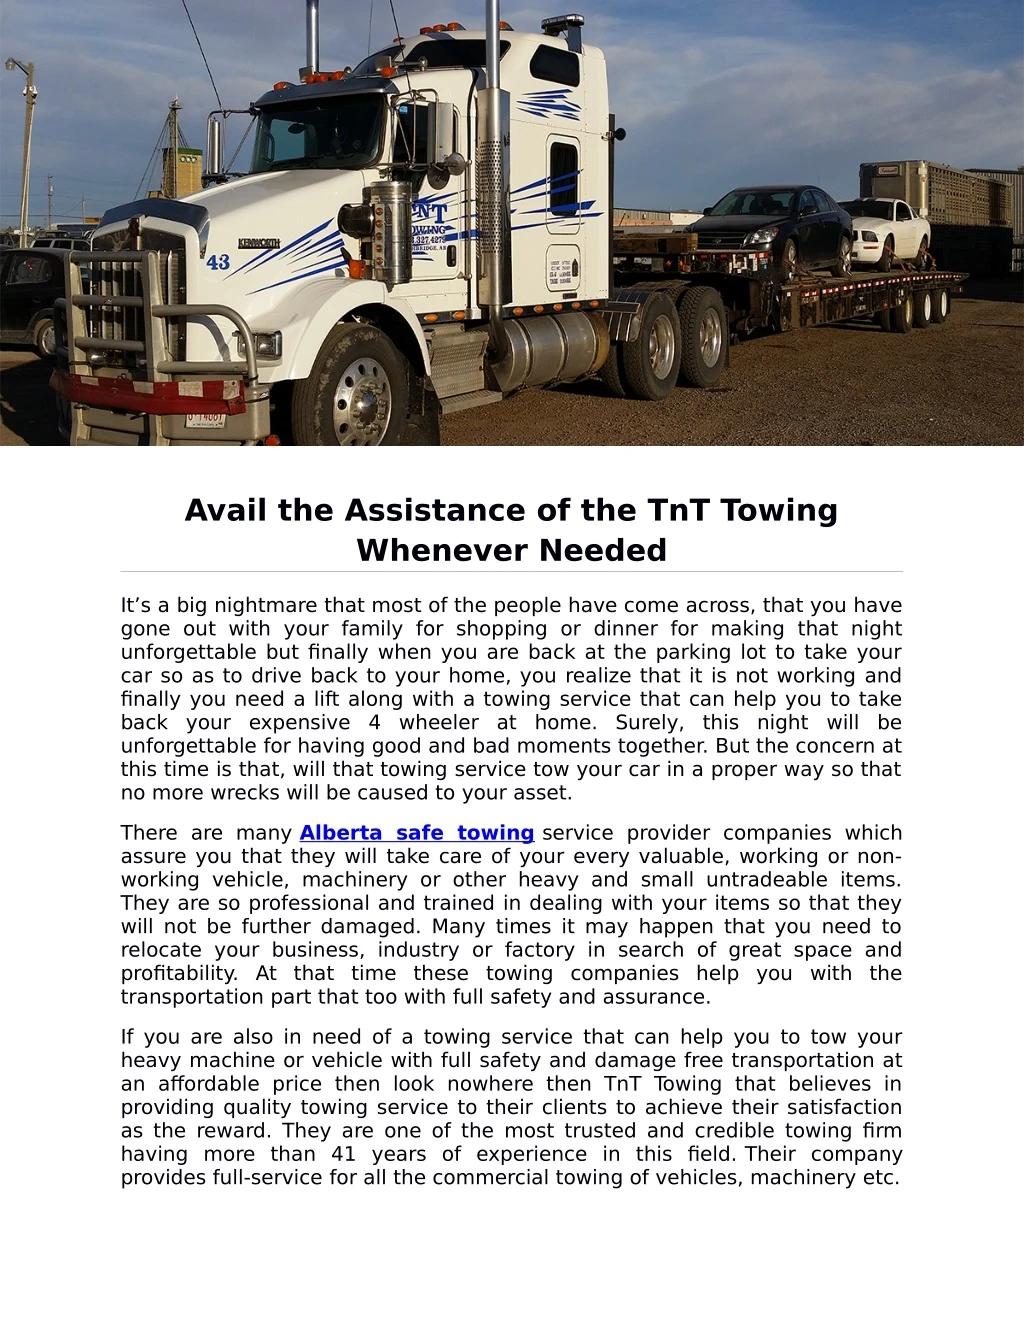 avail the assistance of the tnt towing whenever